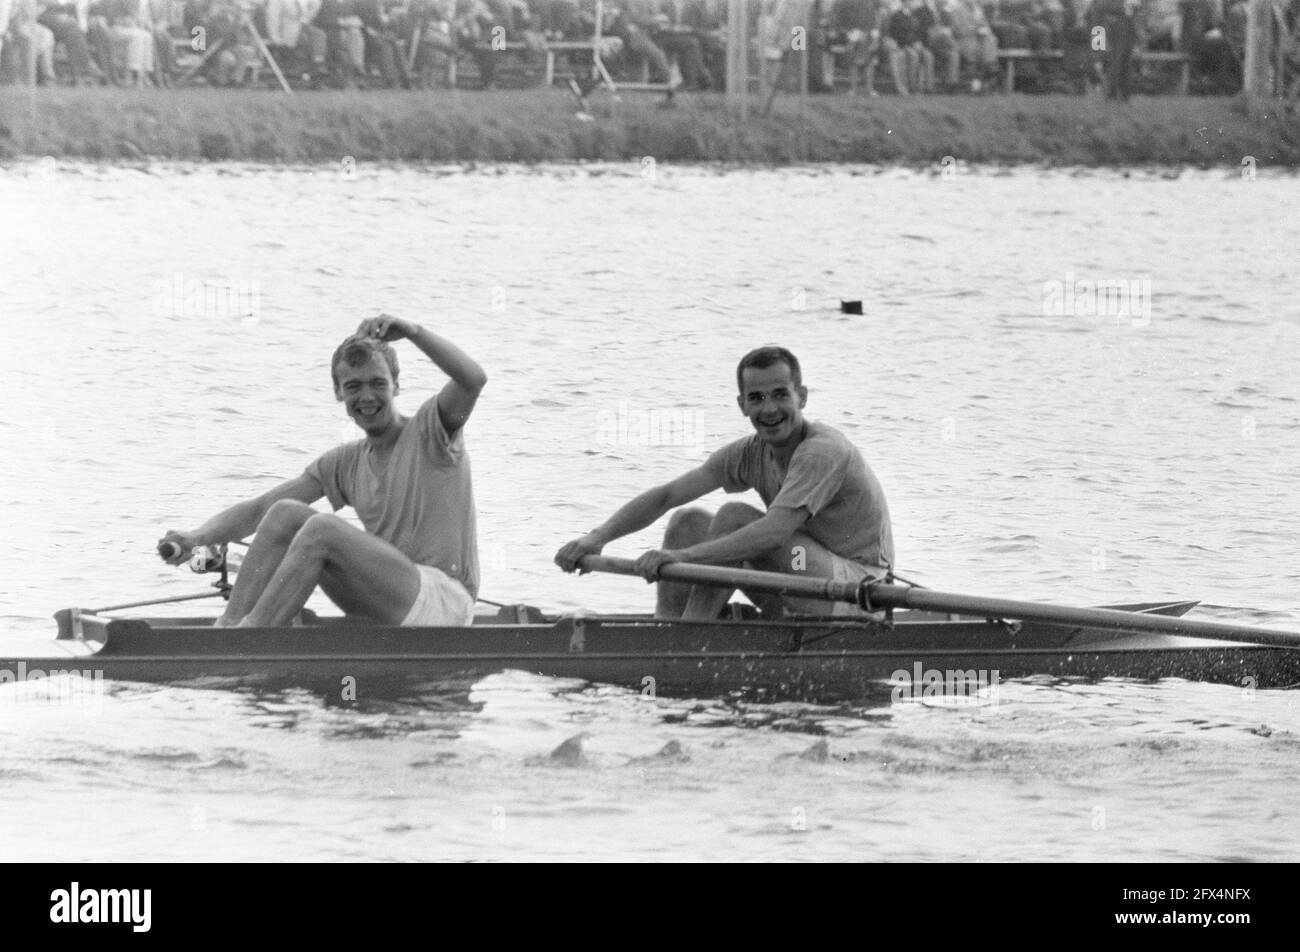 European rowing championships Bosbaan, Blaisse and Veneman finish, August 9, 1964, Rowing, finish, championships, The Netherlands, 20th century press agency photo, news to remember, documentary, historic photography 1945-1990, visual stories, human history of the Twentieth Century, capturing moments in time Stock Photo